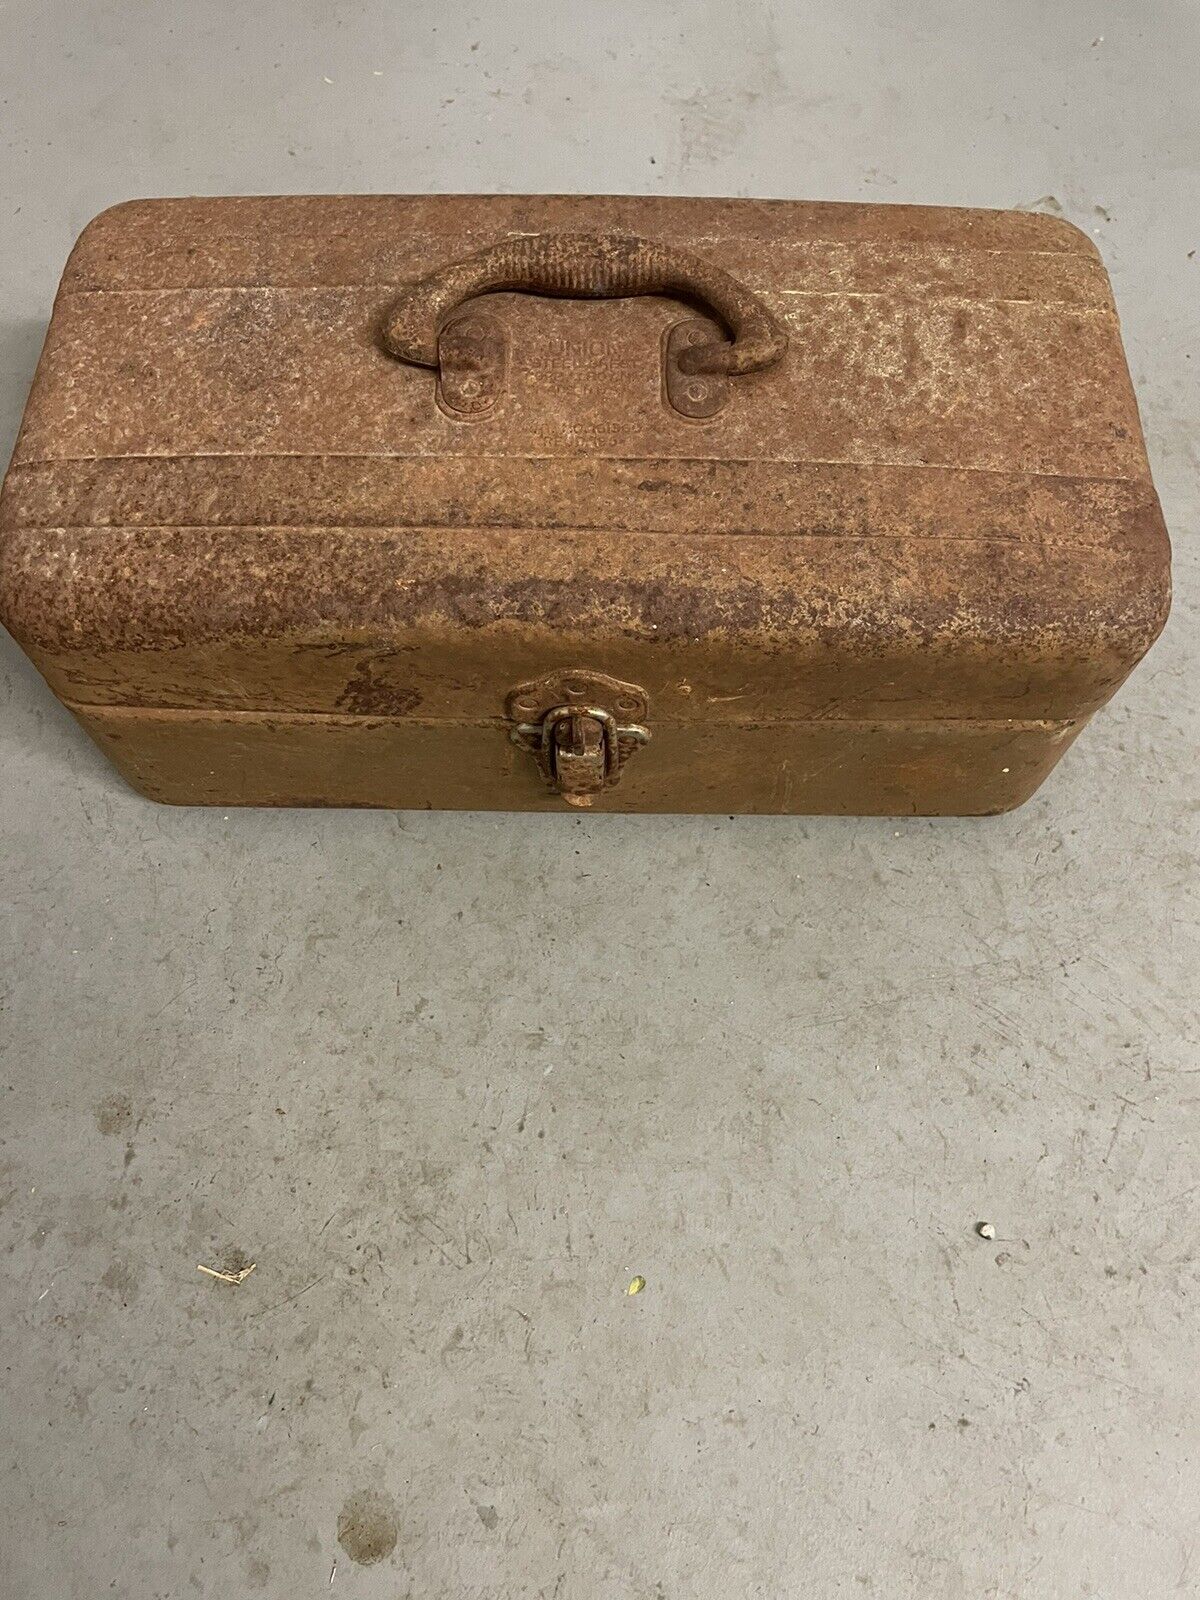 Rare Original Paint Old Antique Metal Fishing Tackle Box Union Steel Chest USA